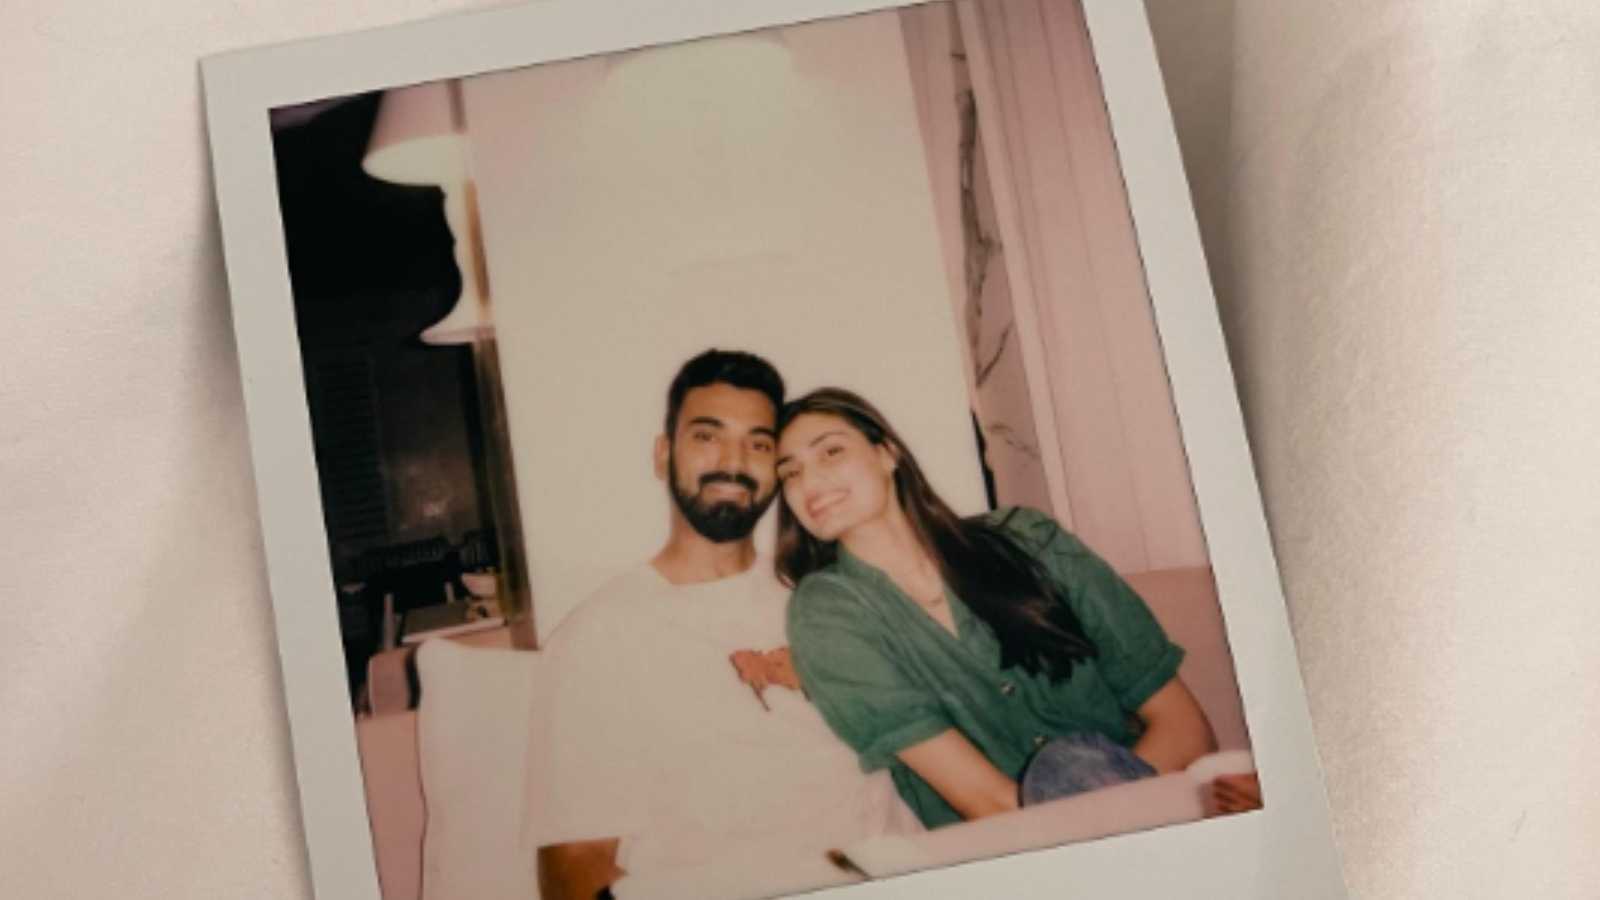 Kab Hai Shaadi? : Athiya Shetty and beau KL Rahul's latest picture has fans spilling hearts over the couple